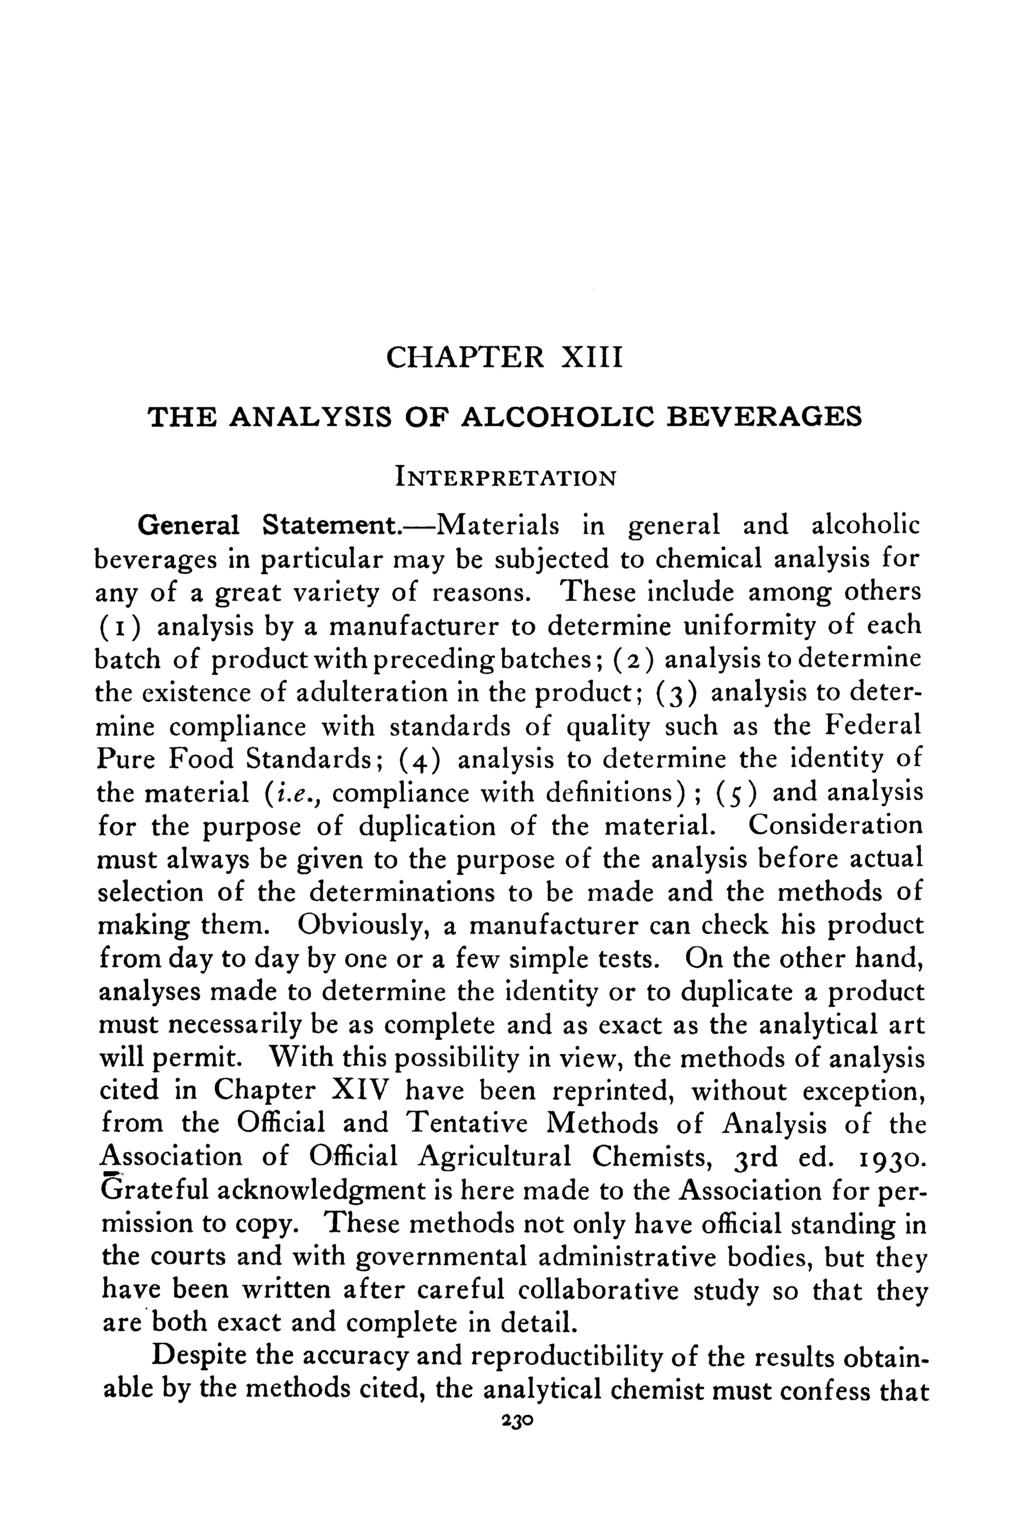 CHAPTER XIII THE ANALYSIS OF ALCOHOLIC BEVERAGES INTERPRETATION General Statement.